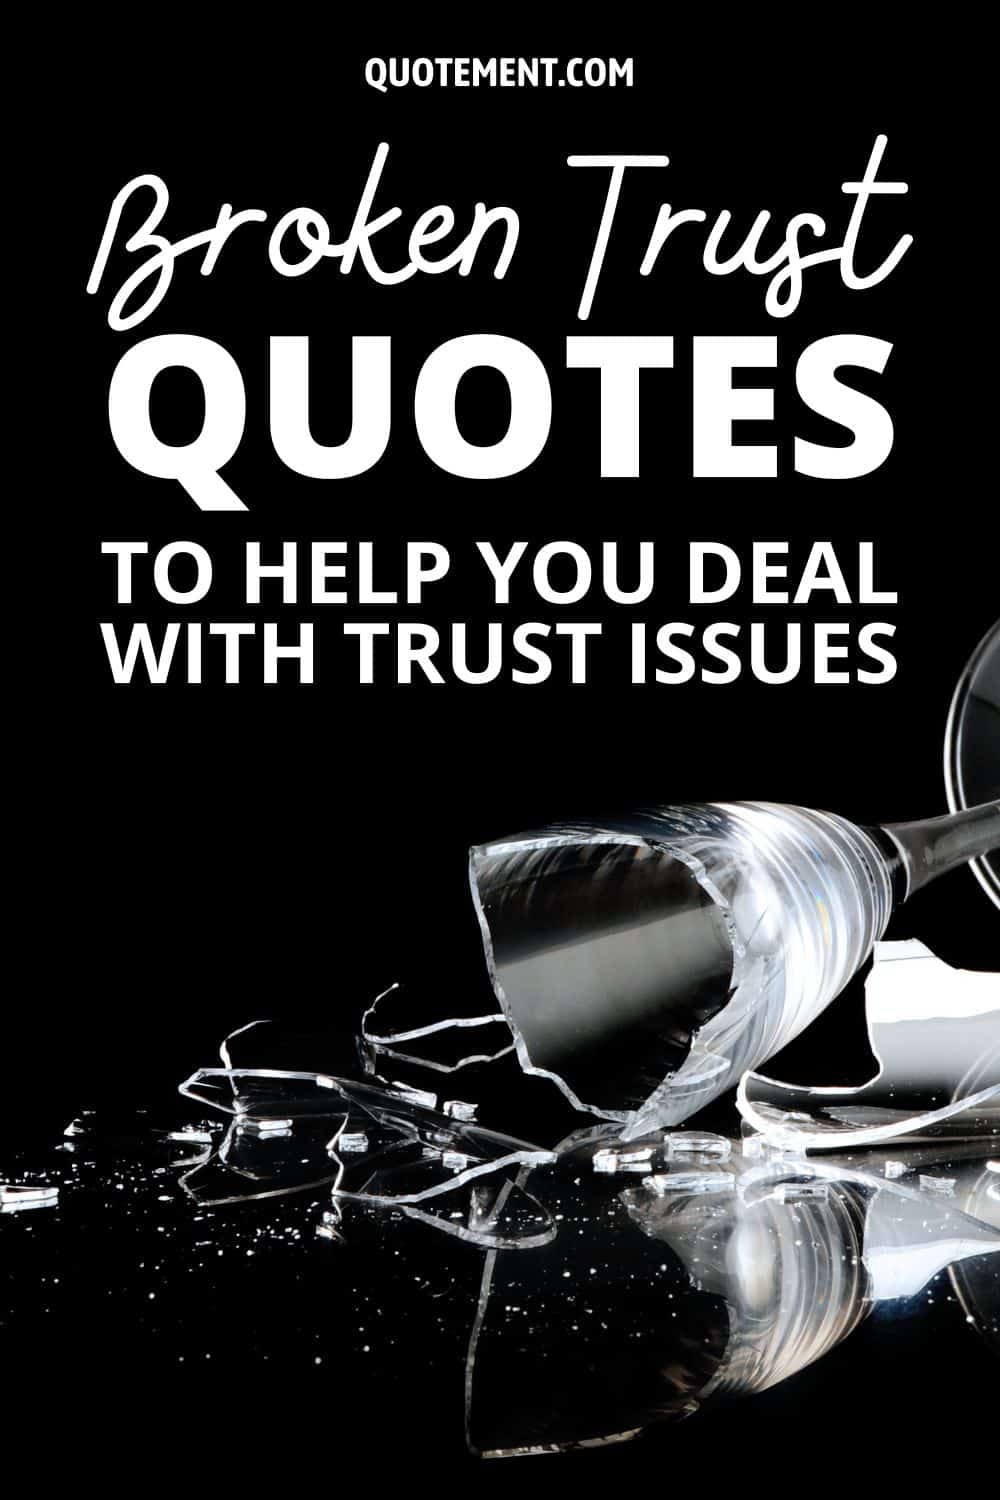 90 Broken Trust Quotes To Help You Deal With Trust Issues
